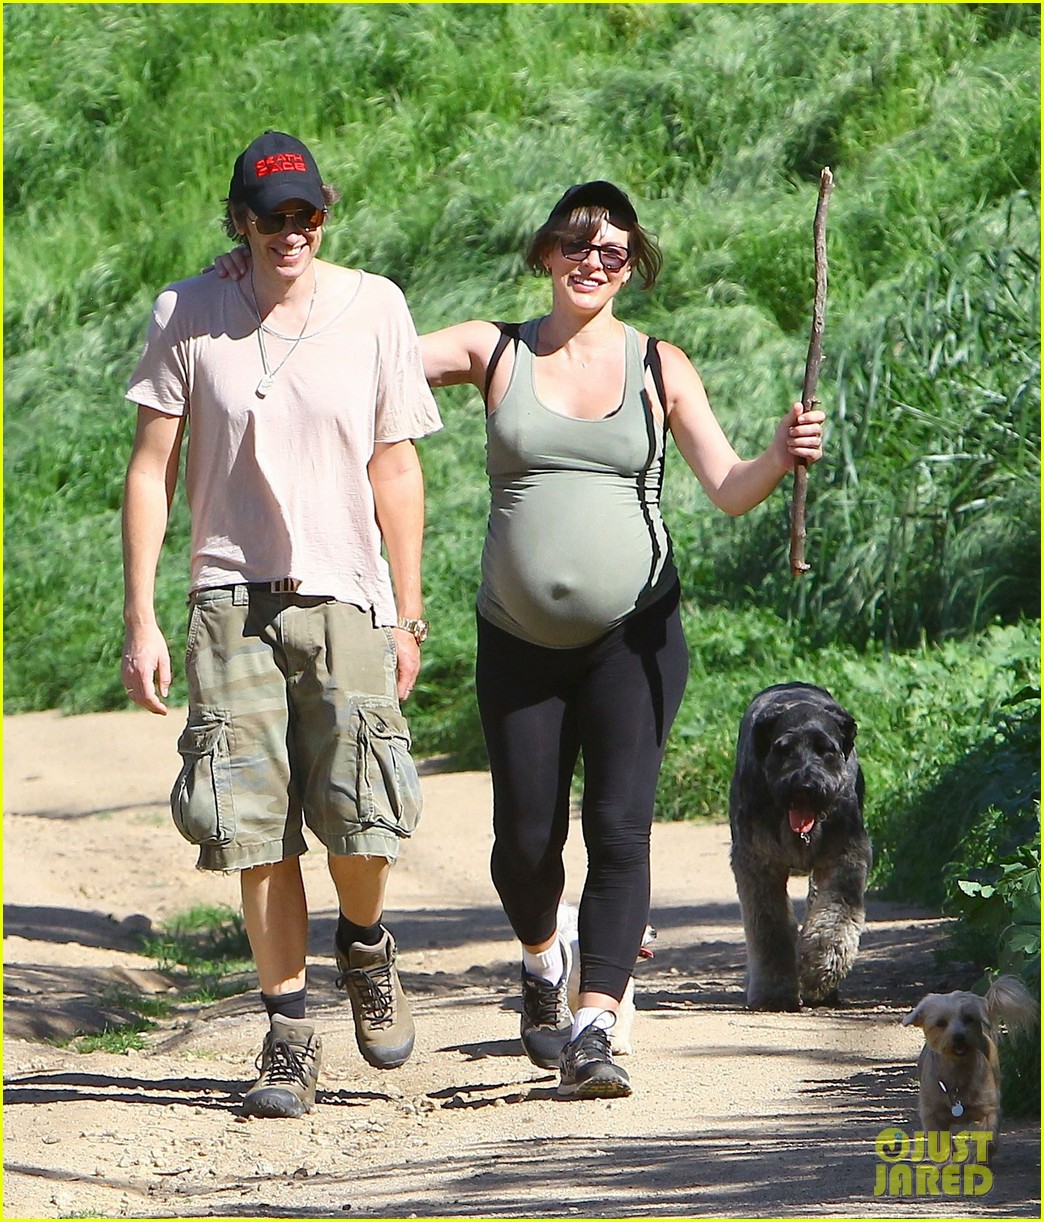 Pregnant Milla Jovovich Shows Off Her Growing Baby Bump While Rocking Another Hike ...1044 x 1222